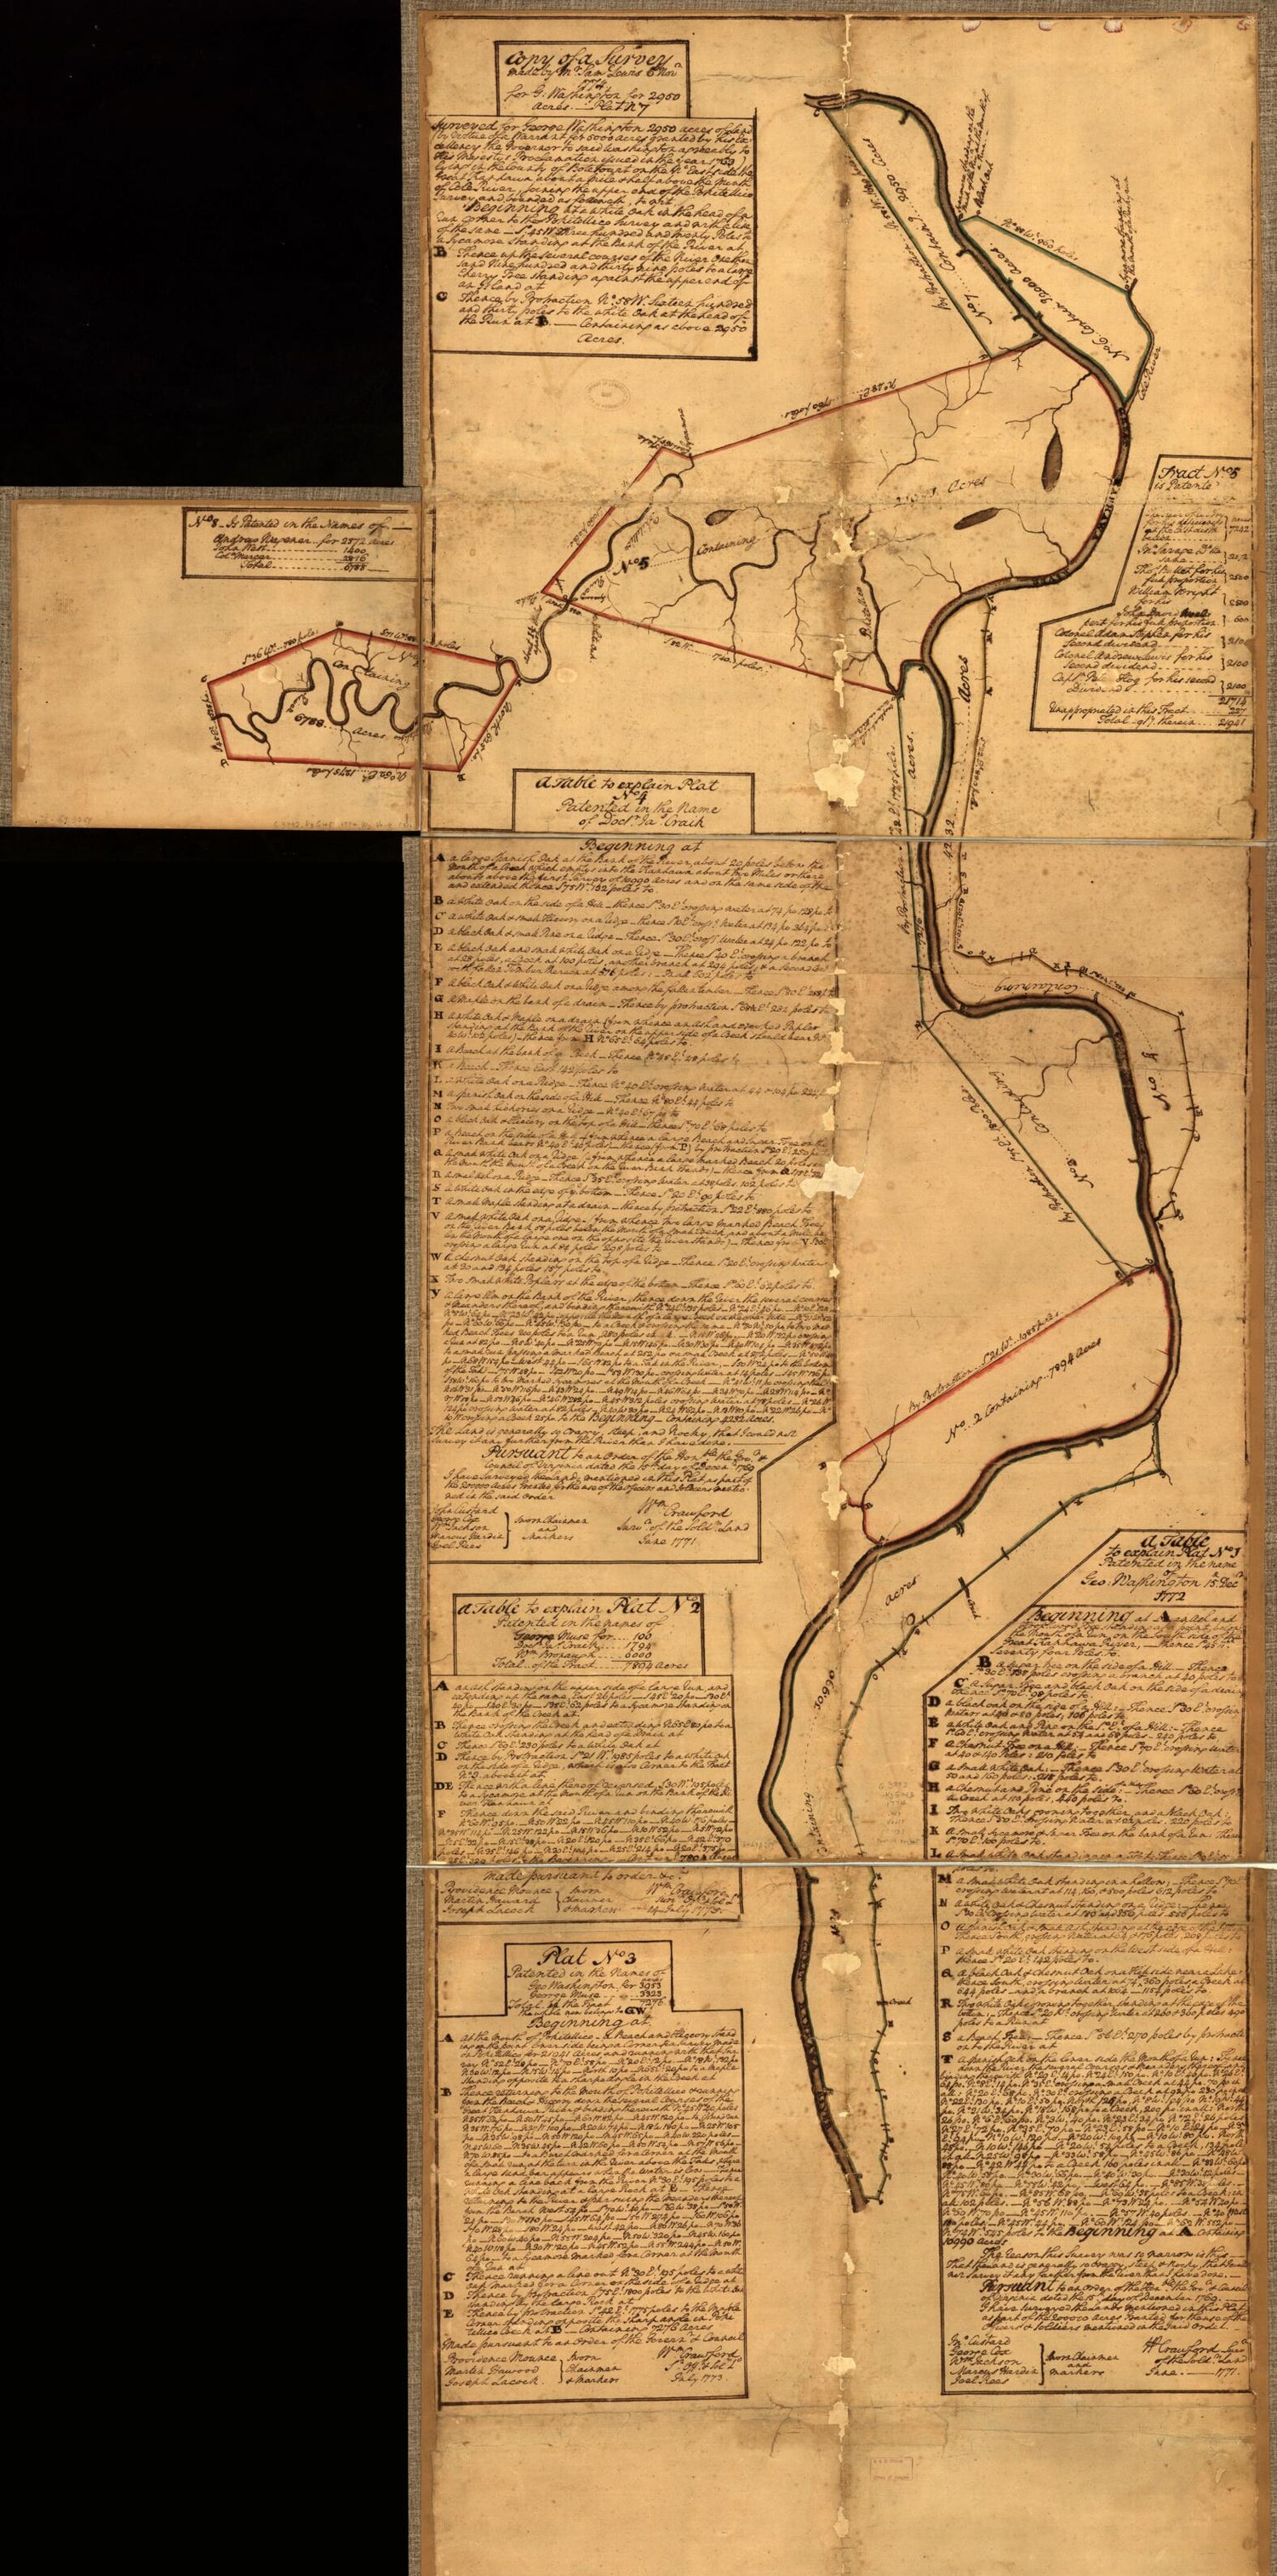 This old map of Eight Survey Tracts Along the Kanawha River, W.Va. Showing Land Granted to George Washington and Others from 1774 was created by William Crawford, Samuel Lewis, George Washington in 1774